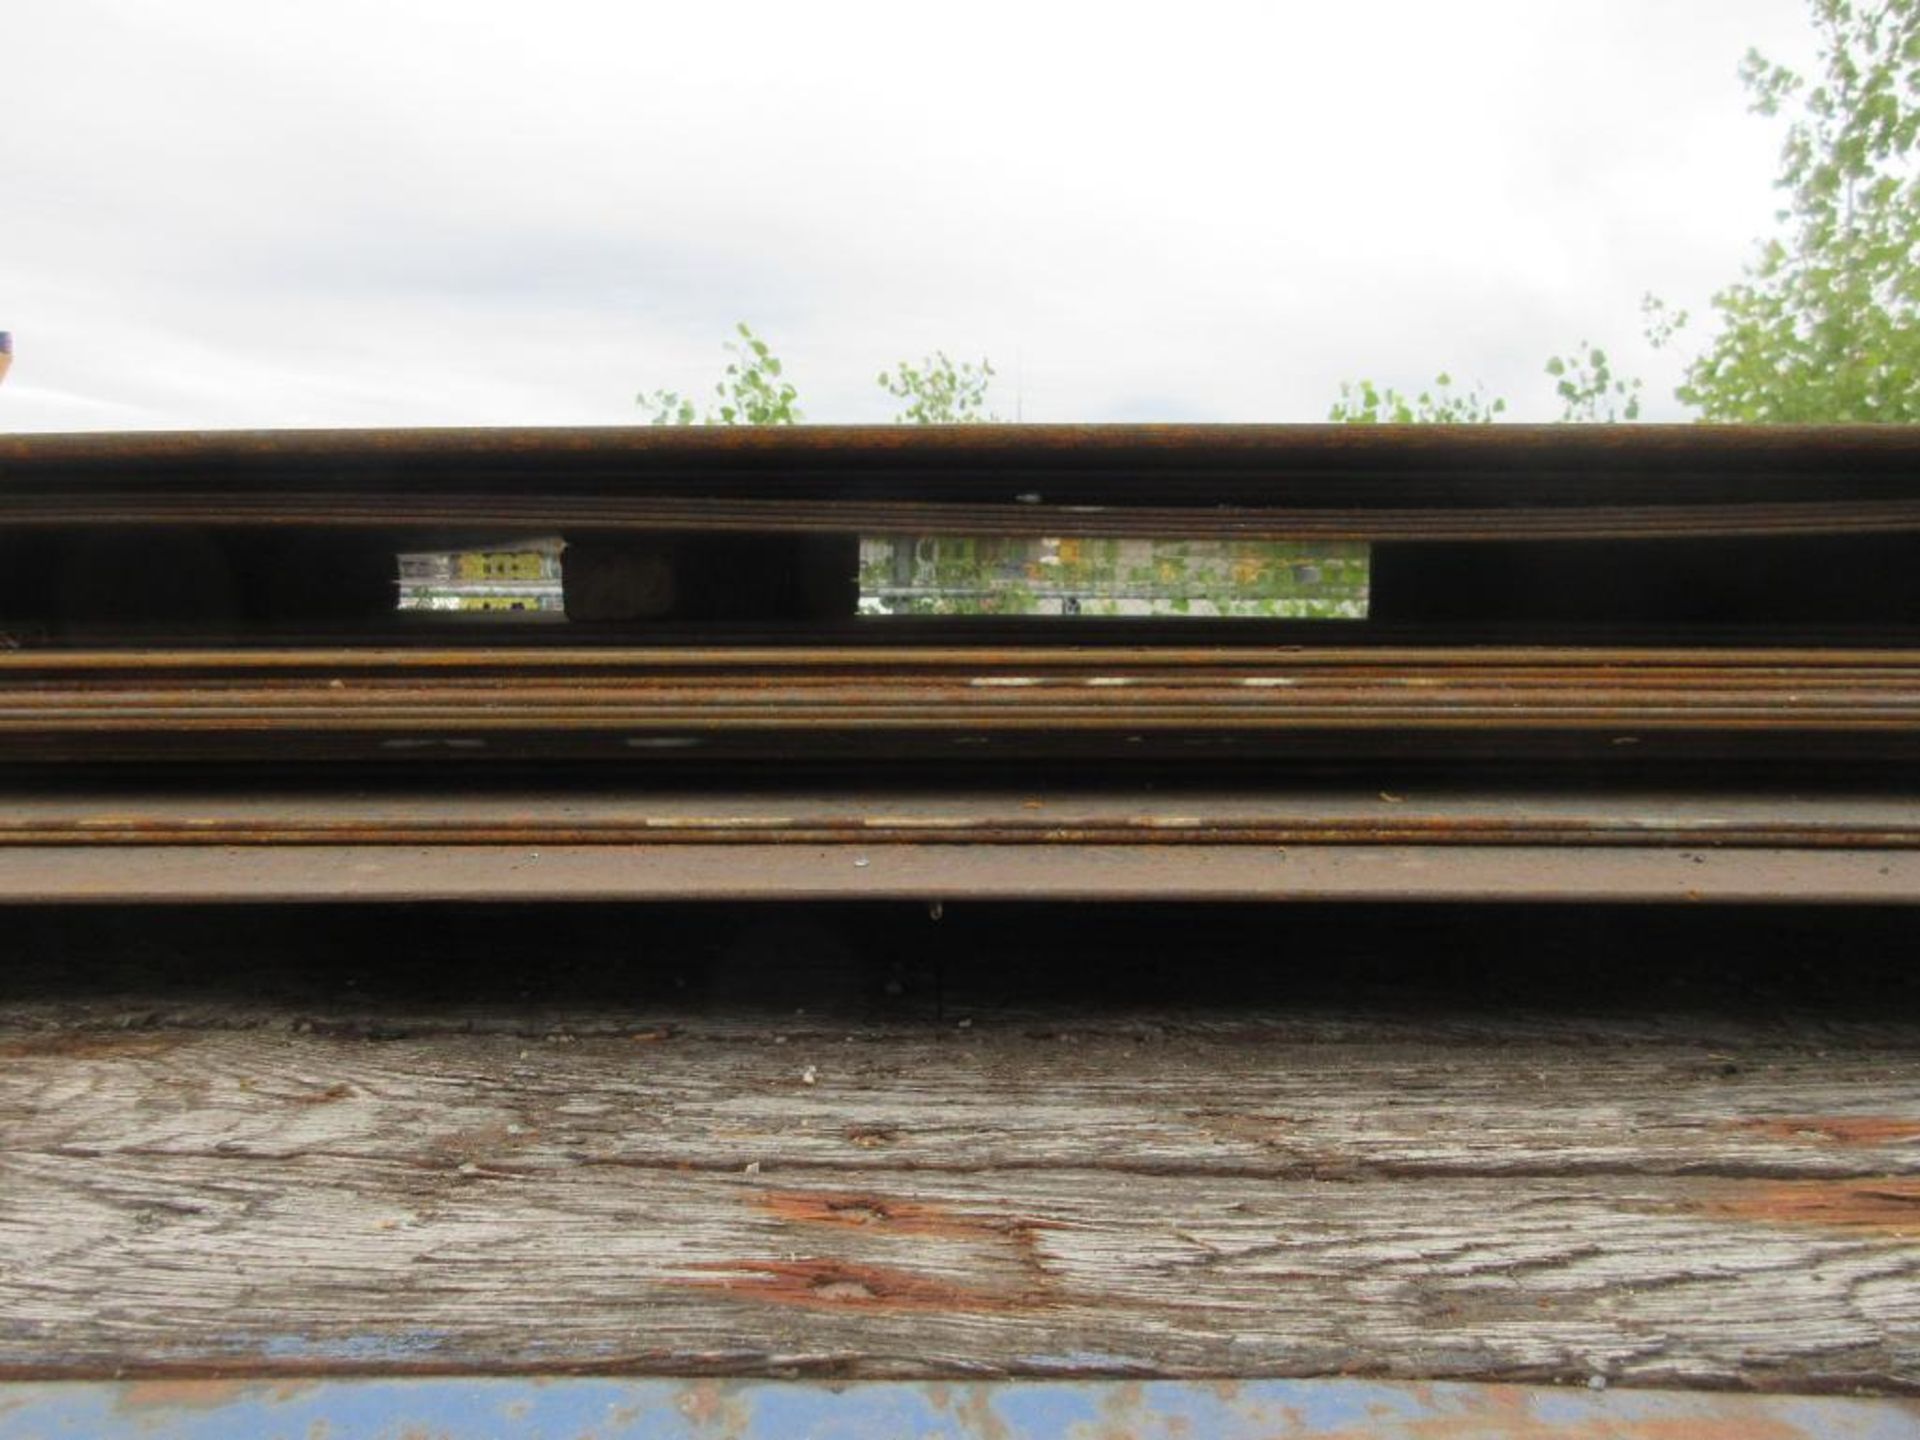 LOT OF 27 SHEETS OF PLATE STEEL ON TRAILER (NO TRAILER), TOTAL WEIGHT 293,559 LBS, SIZES PER PHOTO ( - Image 2 of 14